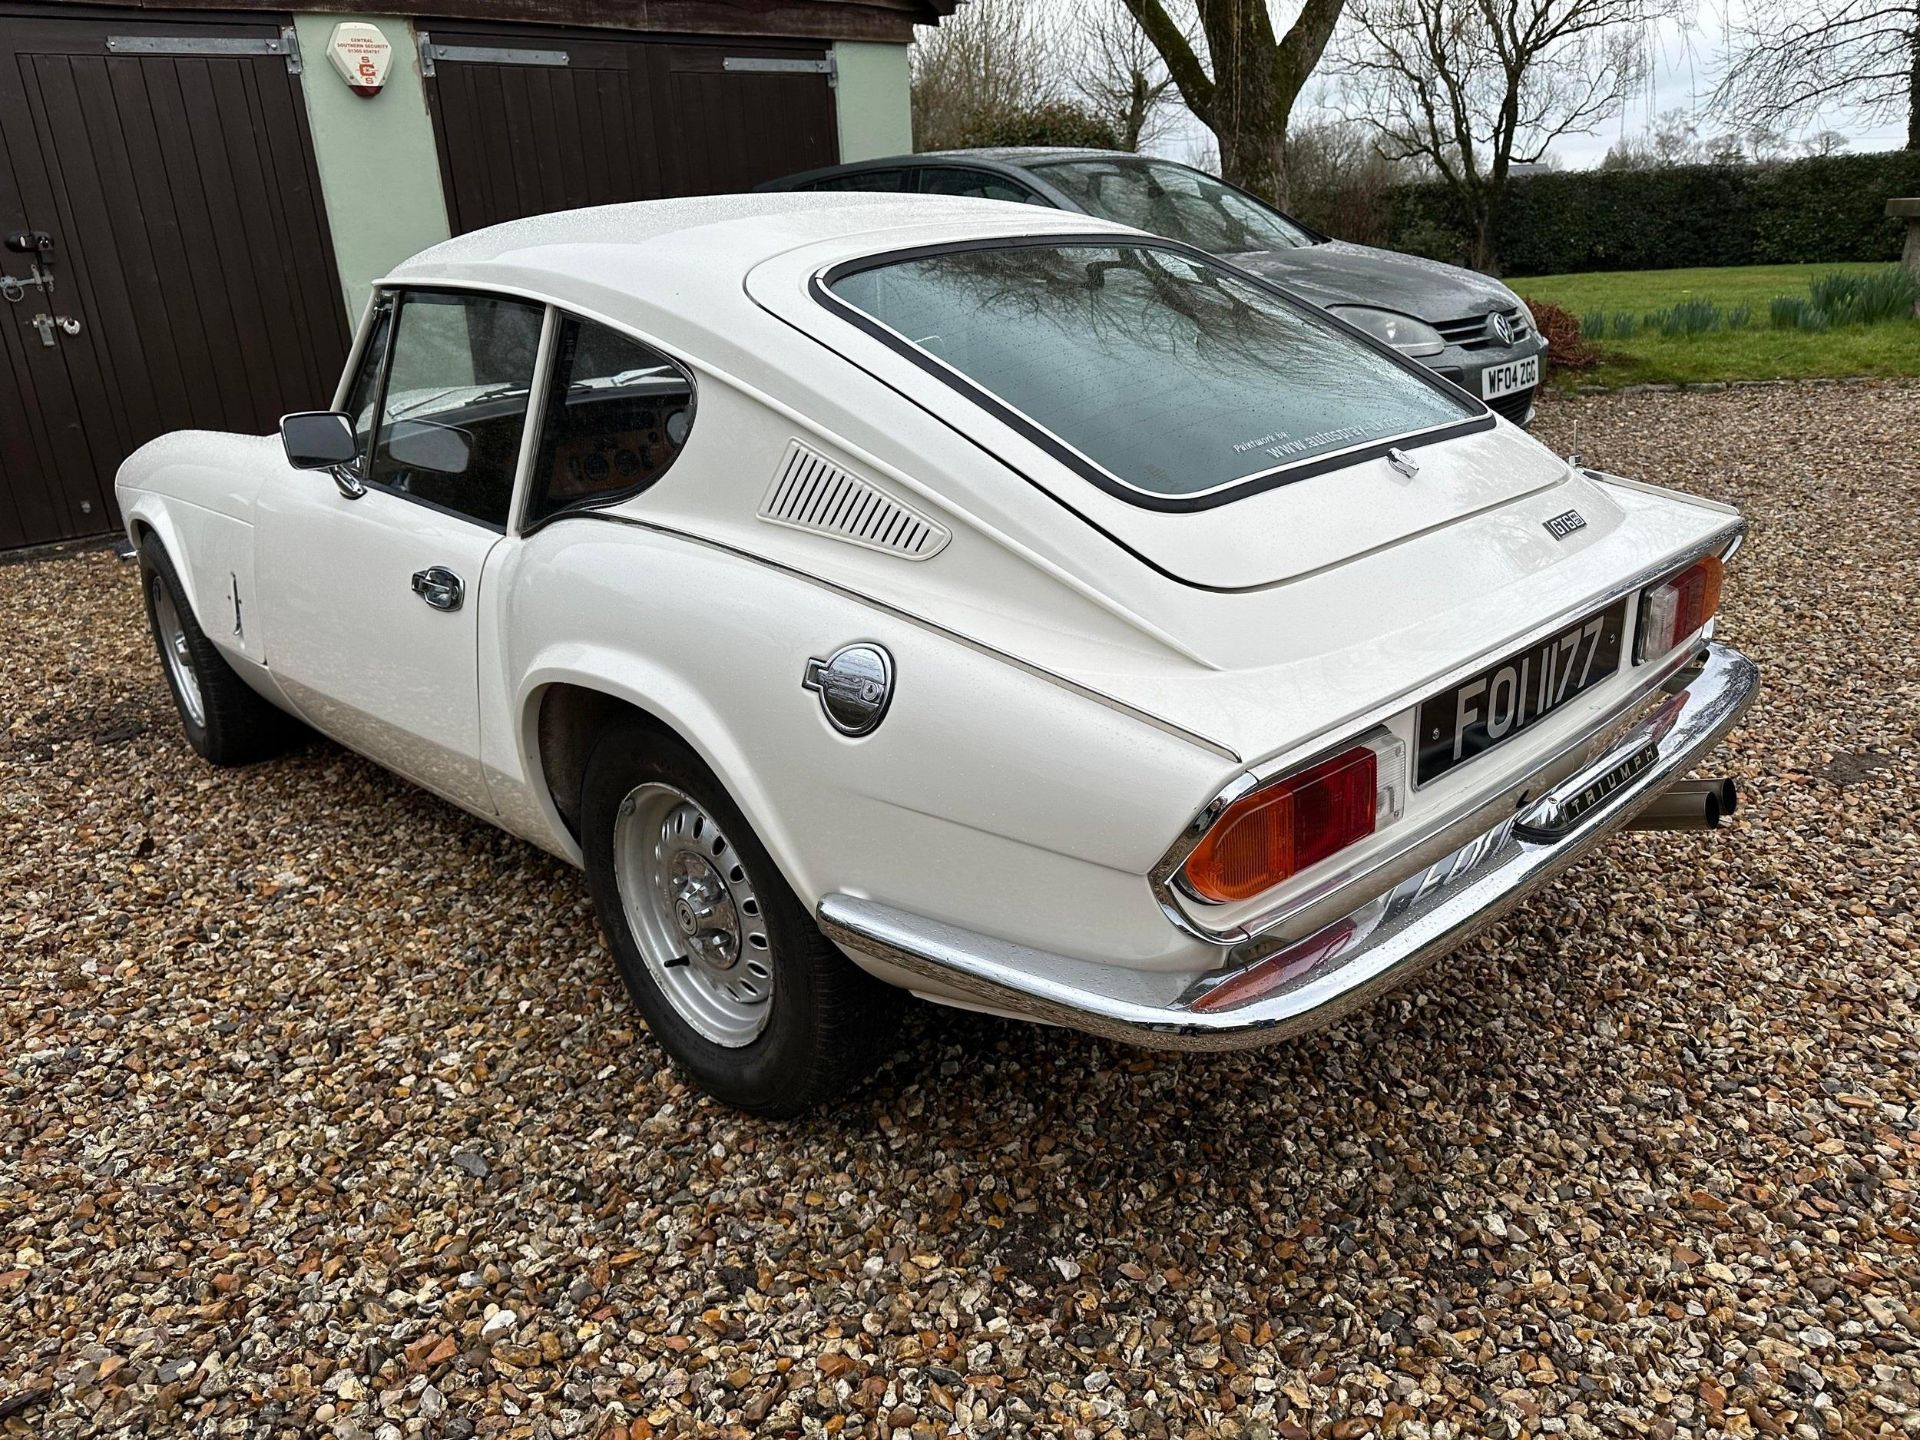 1973 Triumph GT6 Registration number FOI 1177 Chassis number KE145270 Engine number 24517 White with - Image 23 of 34